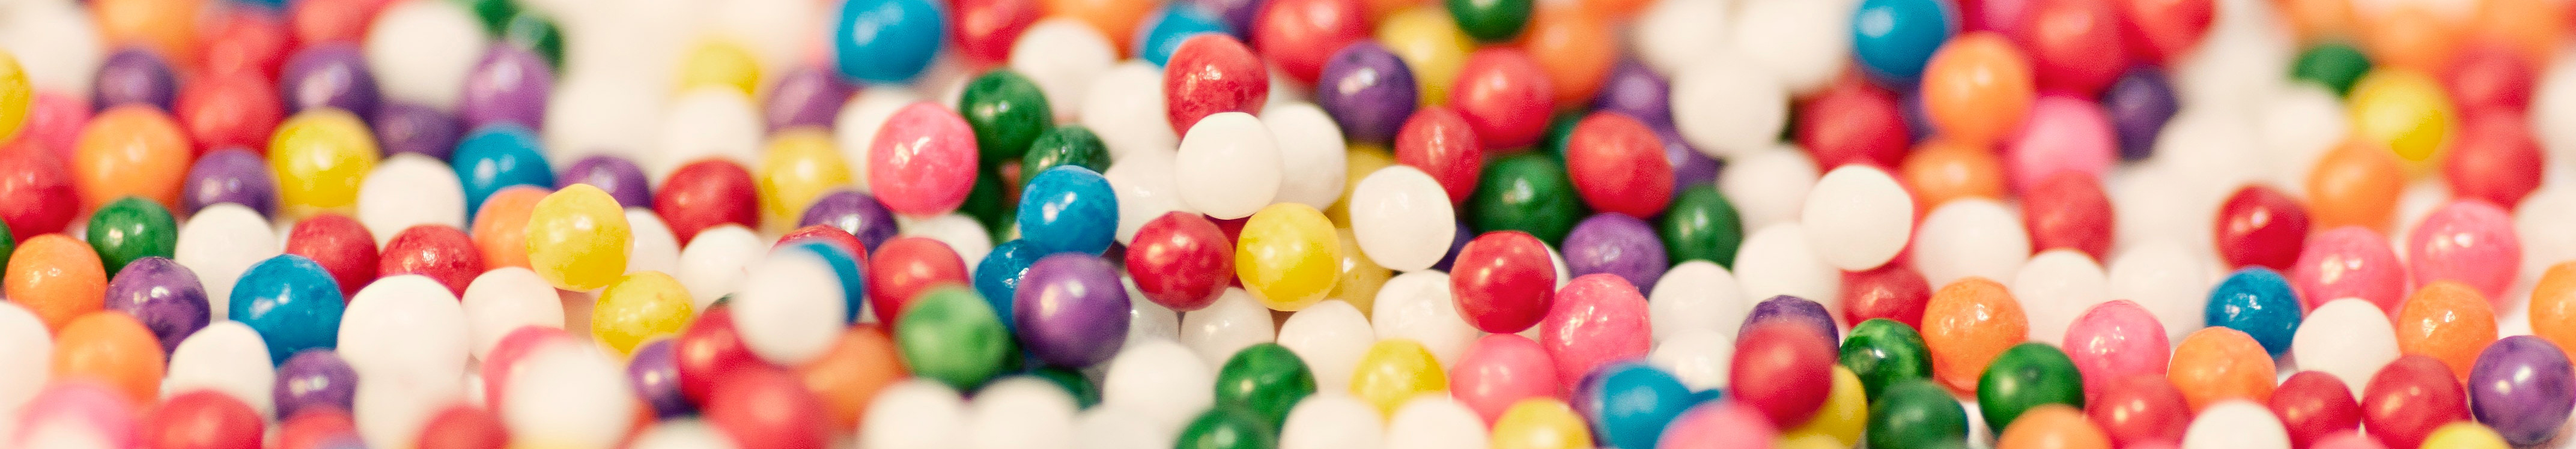 candy pellets with a wonderous array of colors